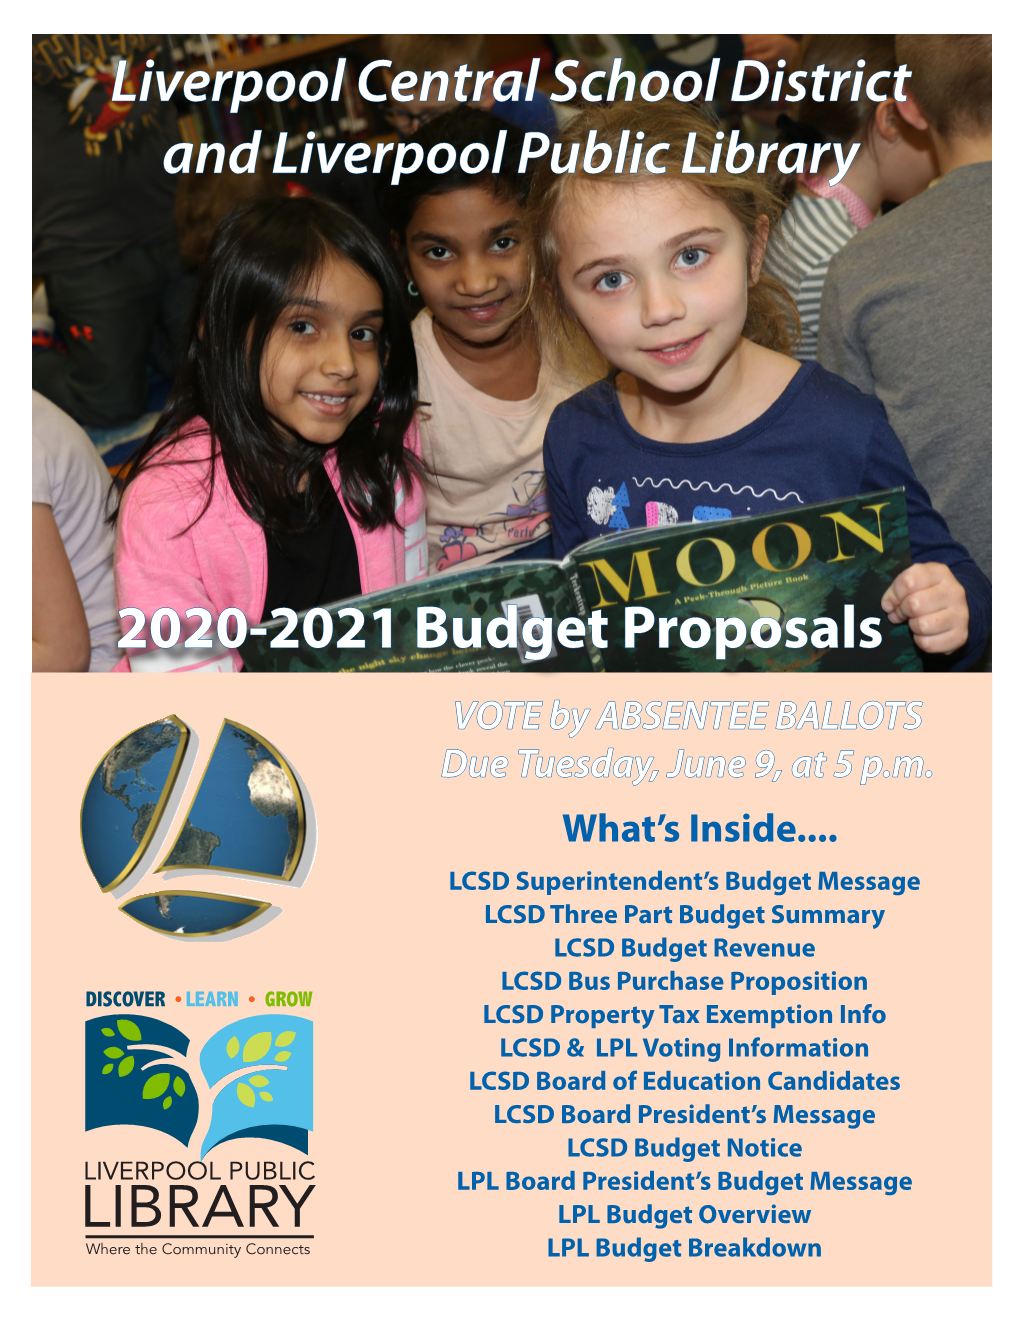 2020-2021 Budget Proposals VOTE by ABSENTEE BALLOTS Due Tuesday, June 9, at 5 P.M